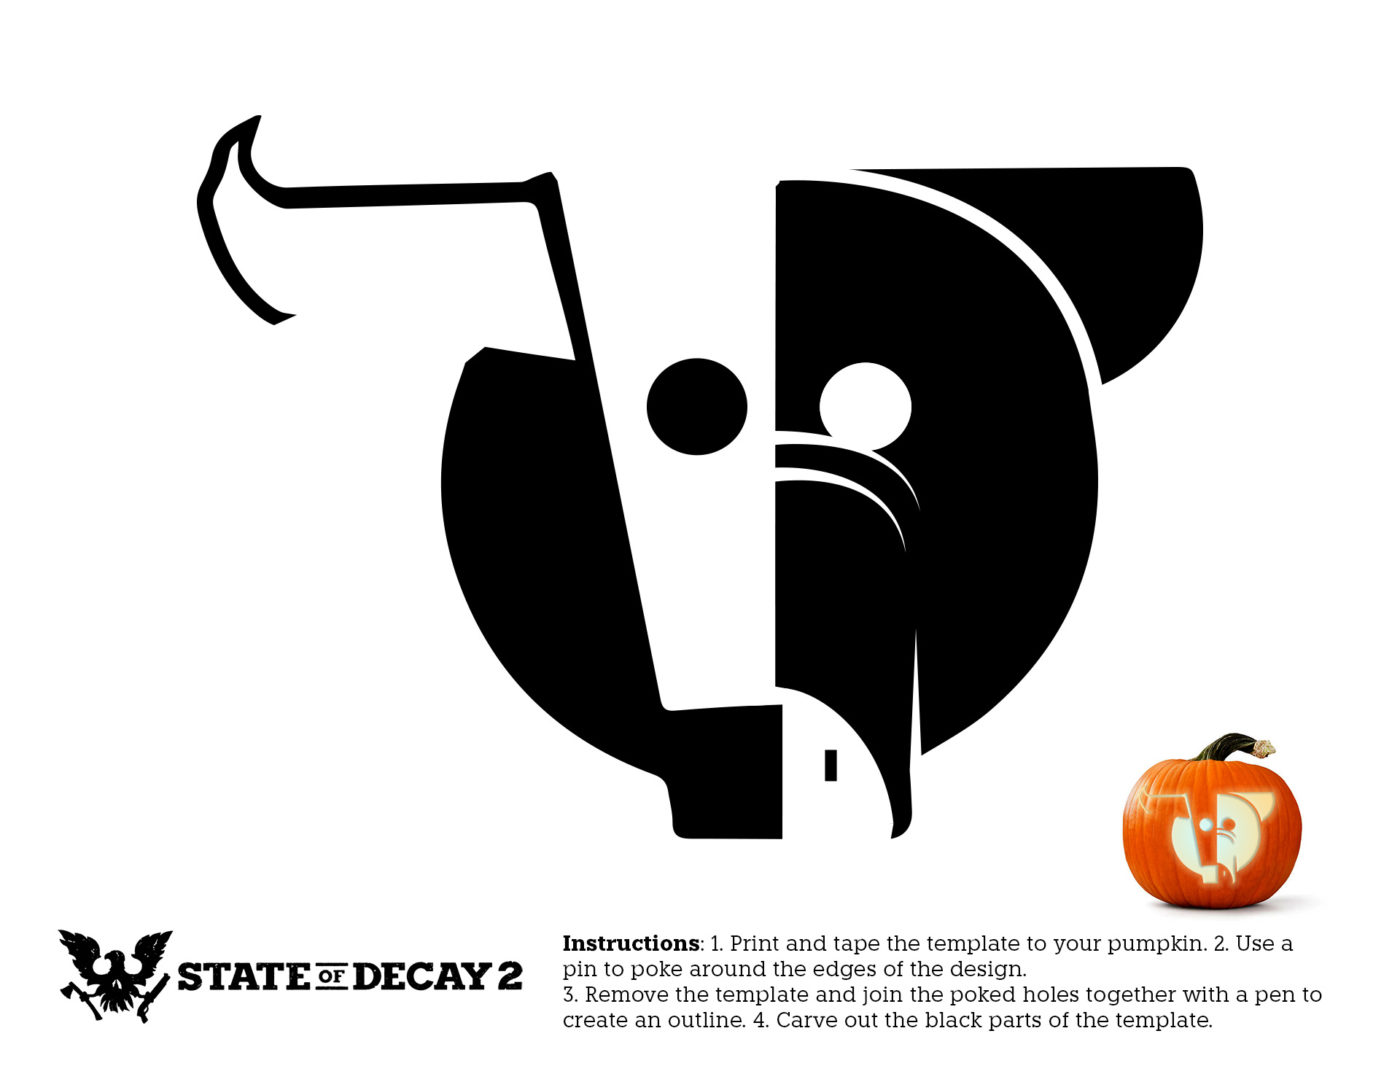 Stencil of the Swine and Bovine logo with the following instructions: 1.Print and tape the template to your pumpkin. 2. Use a pin to poke around the edges of the design. 3.Remove the template and join the poked holes together with a pen to create an outline. 4. Carve the black parts of the template.